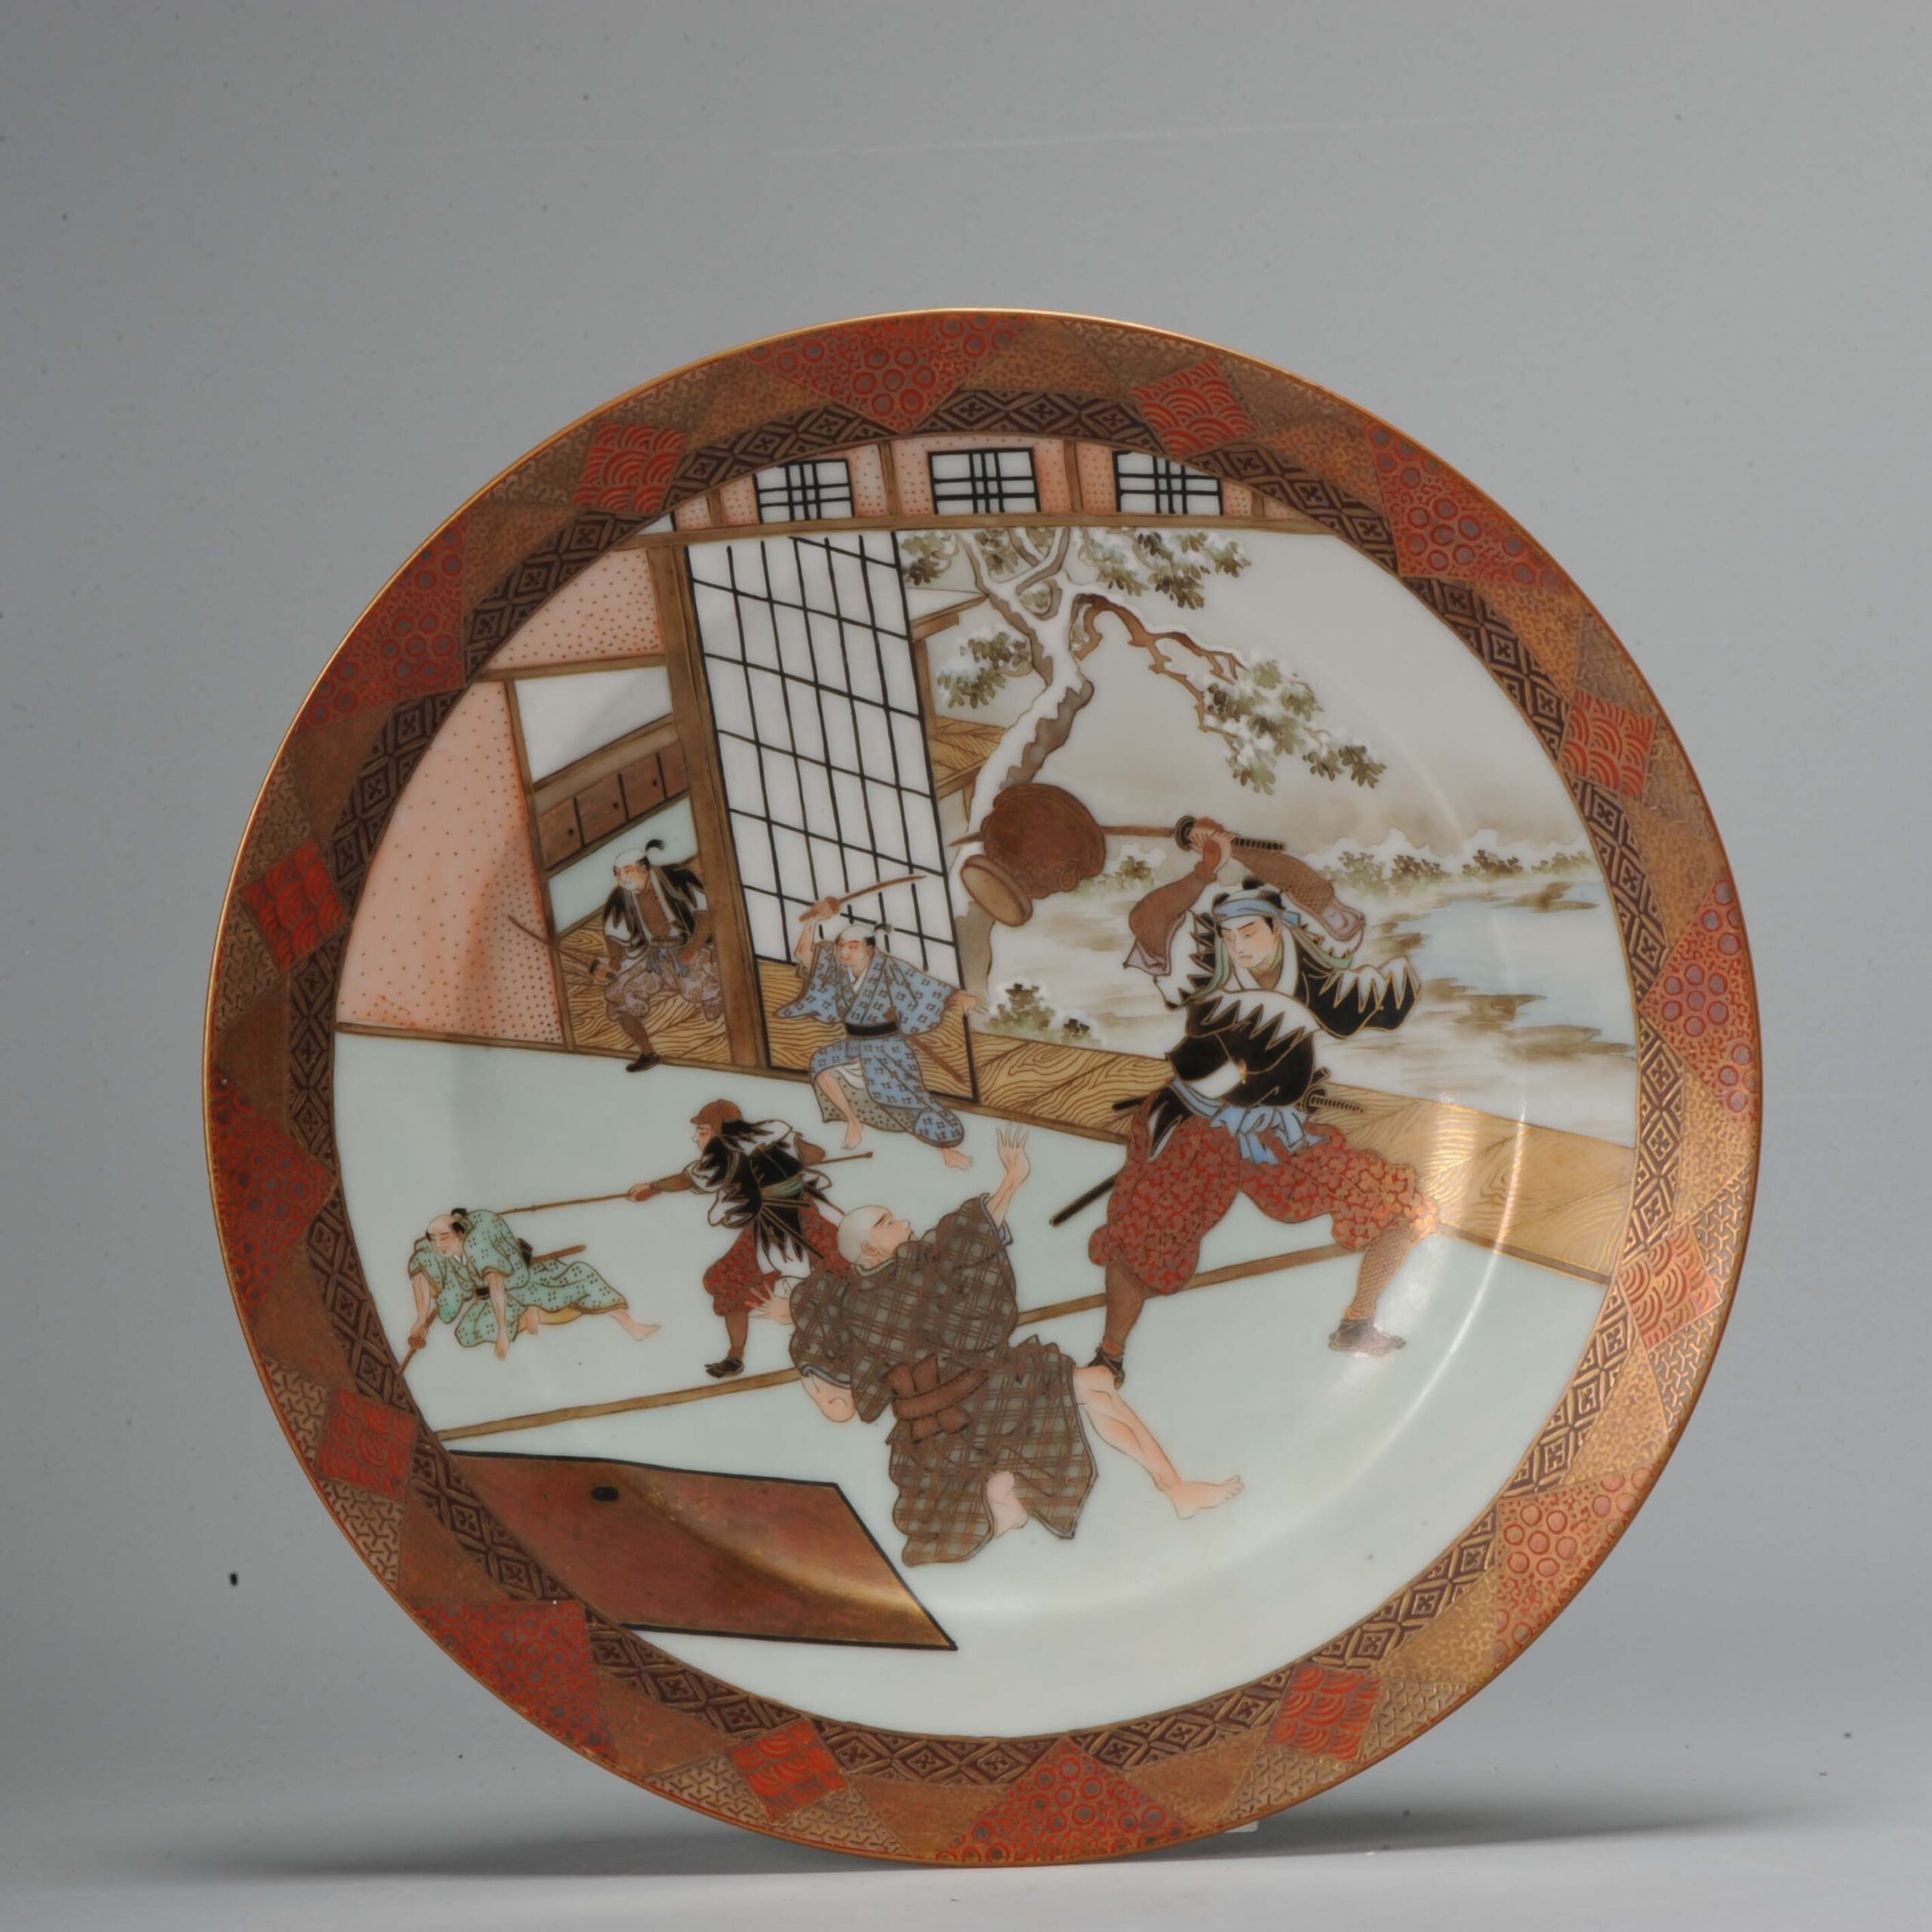 Antique Japanese Porcelain Dish with warrior scene Top quality work Japan Marked Base